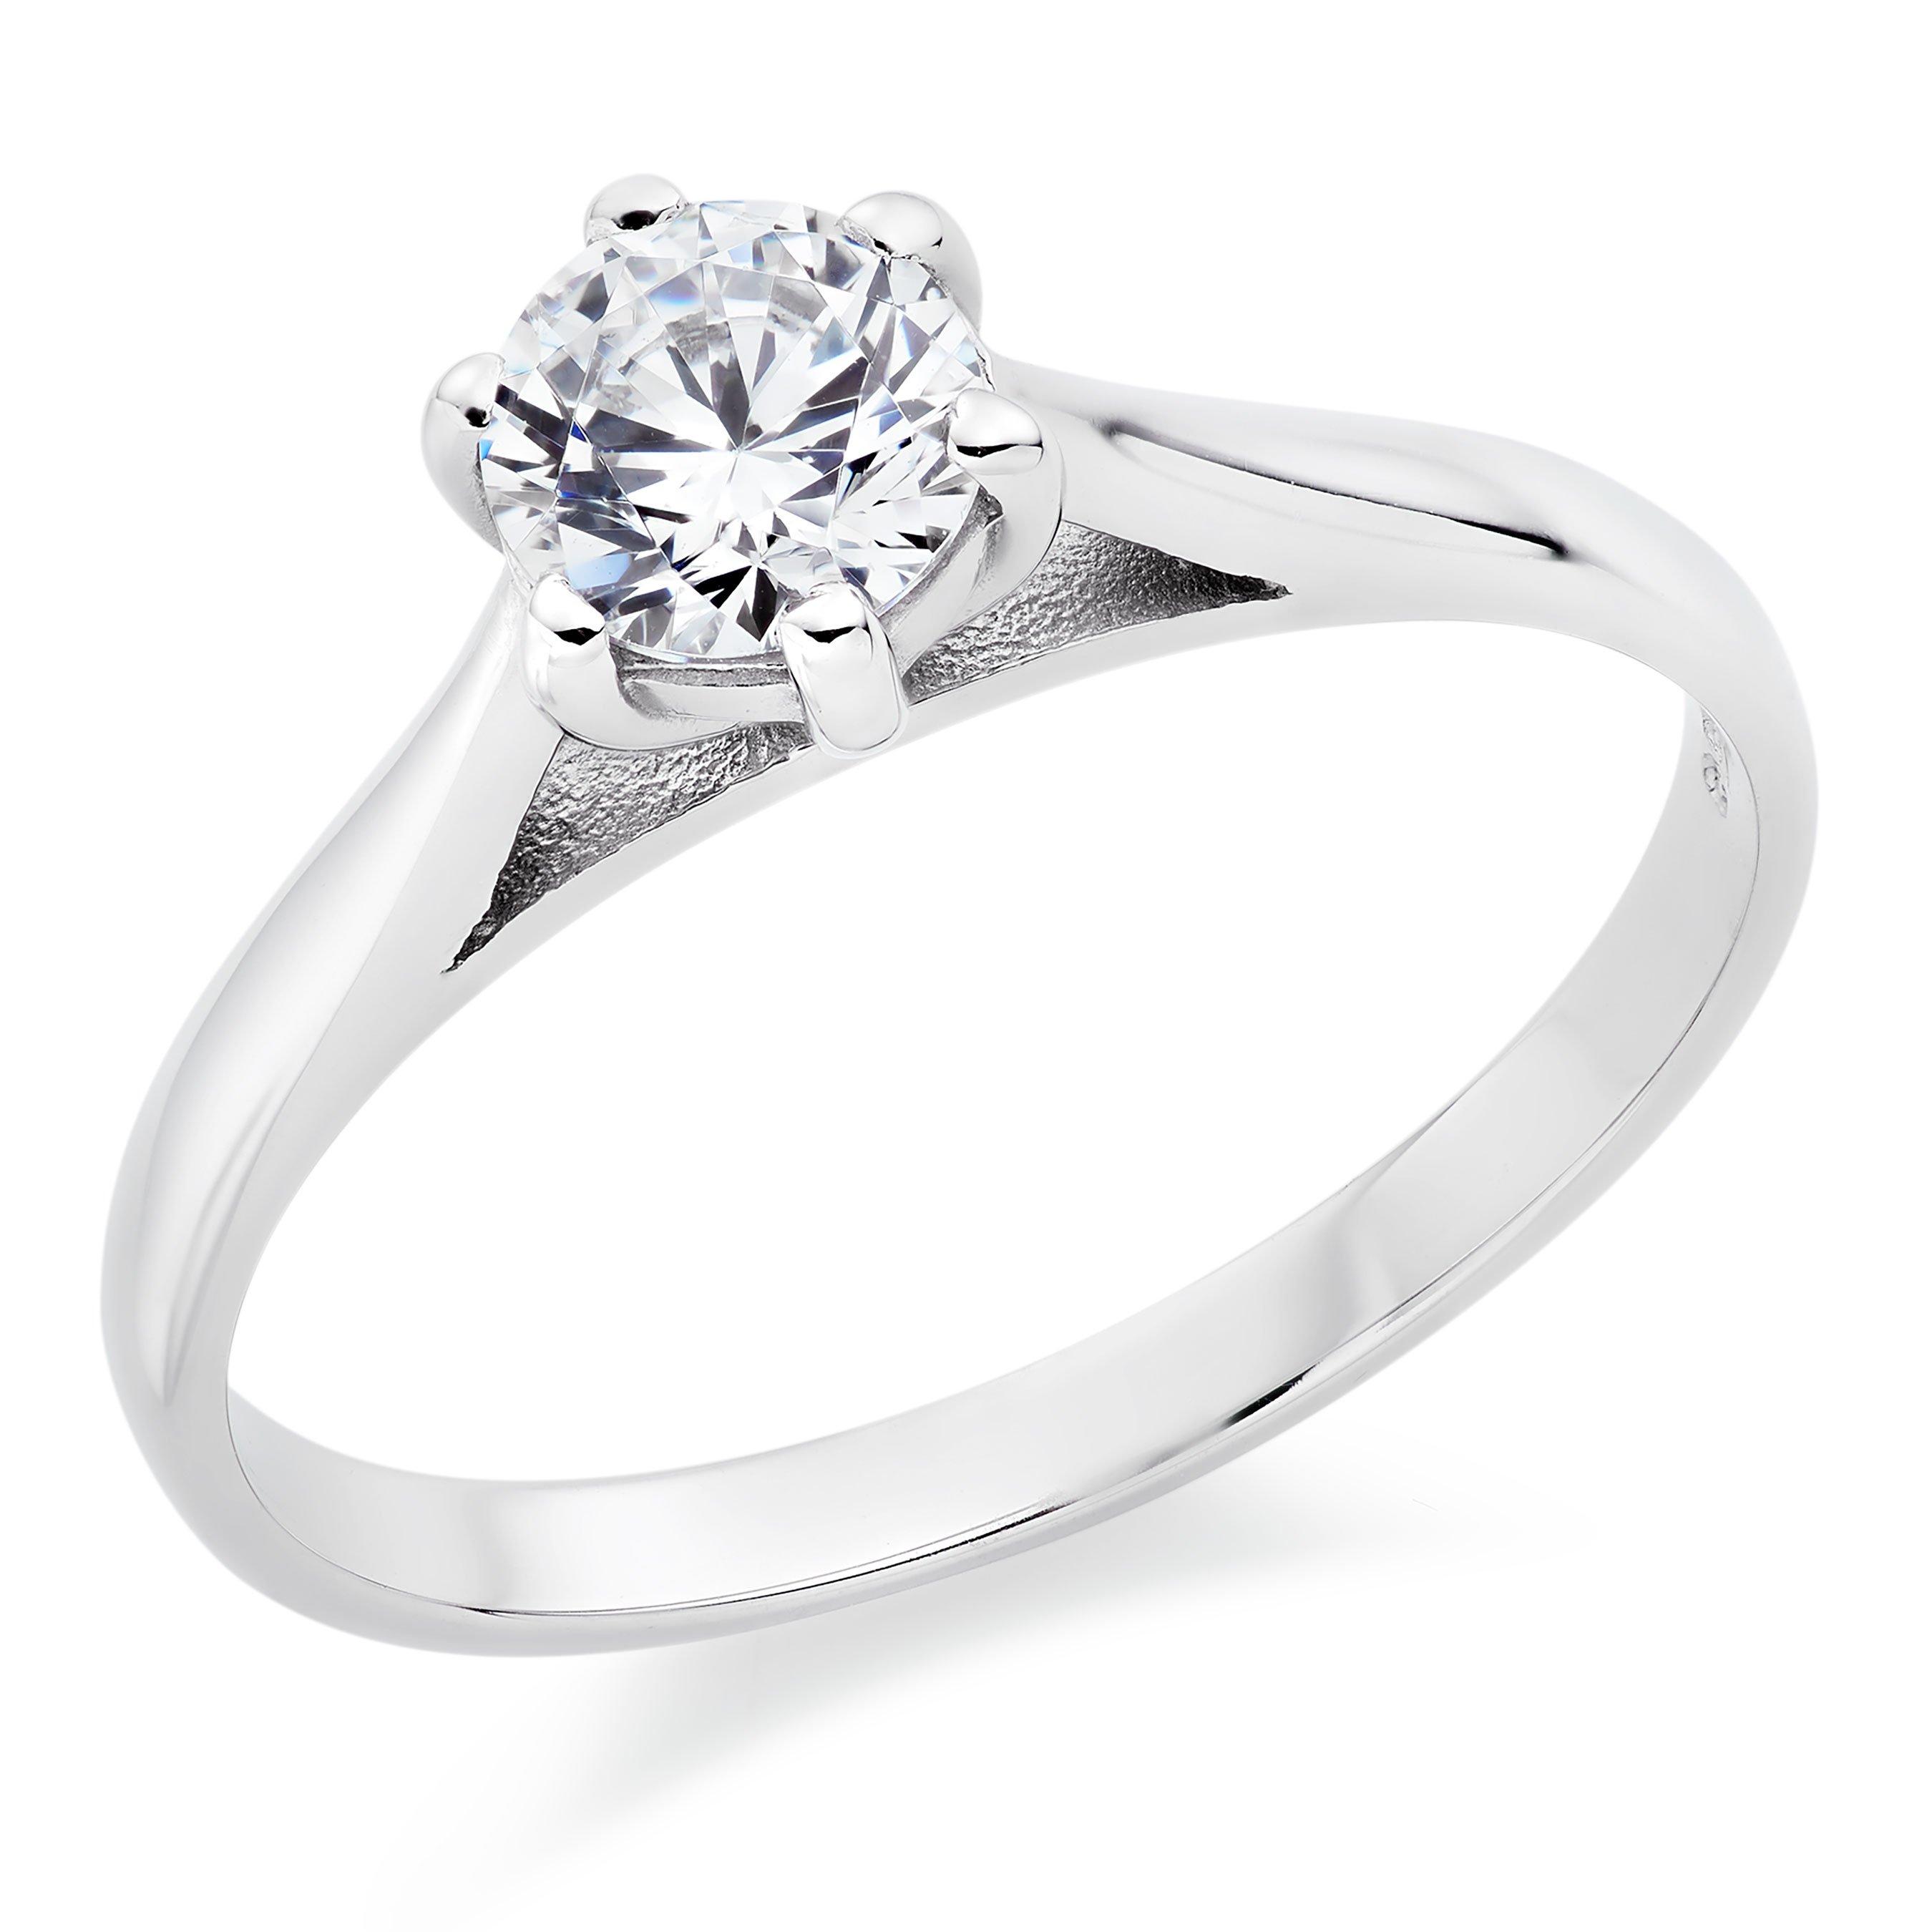 9ct White Gold Cubic Zirconia Solitaire Ring | 0127187 | Beaverbrooks ...